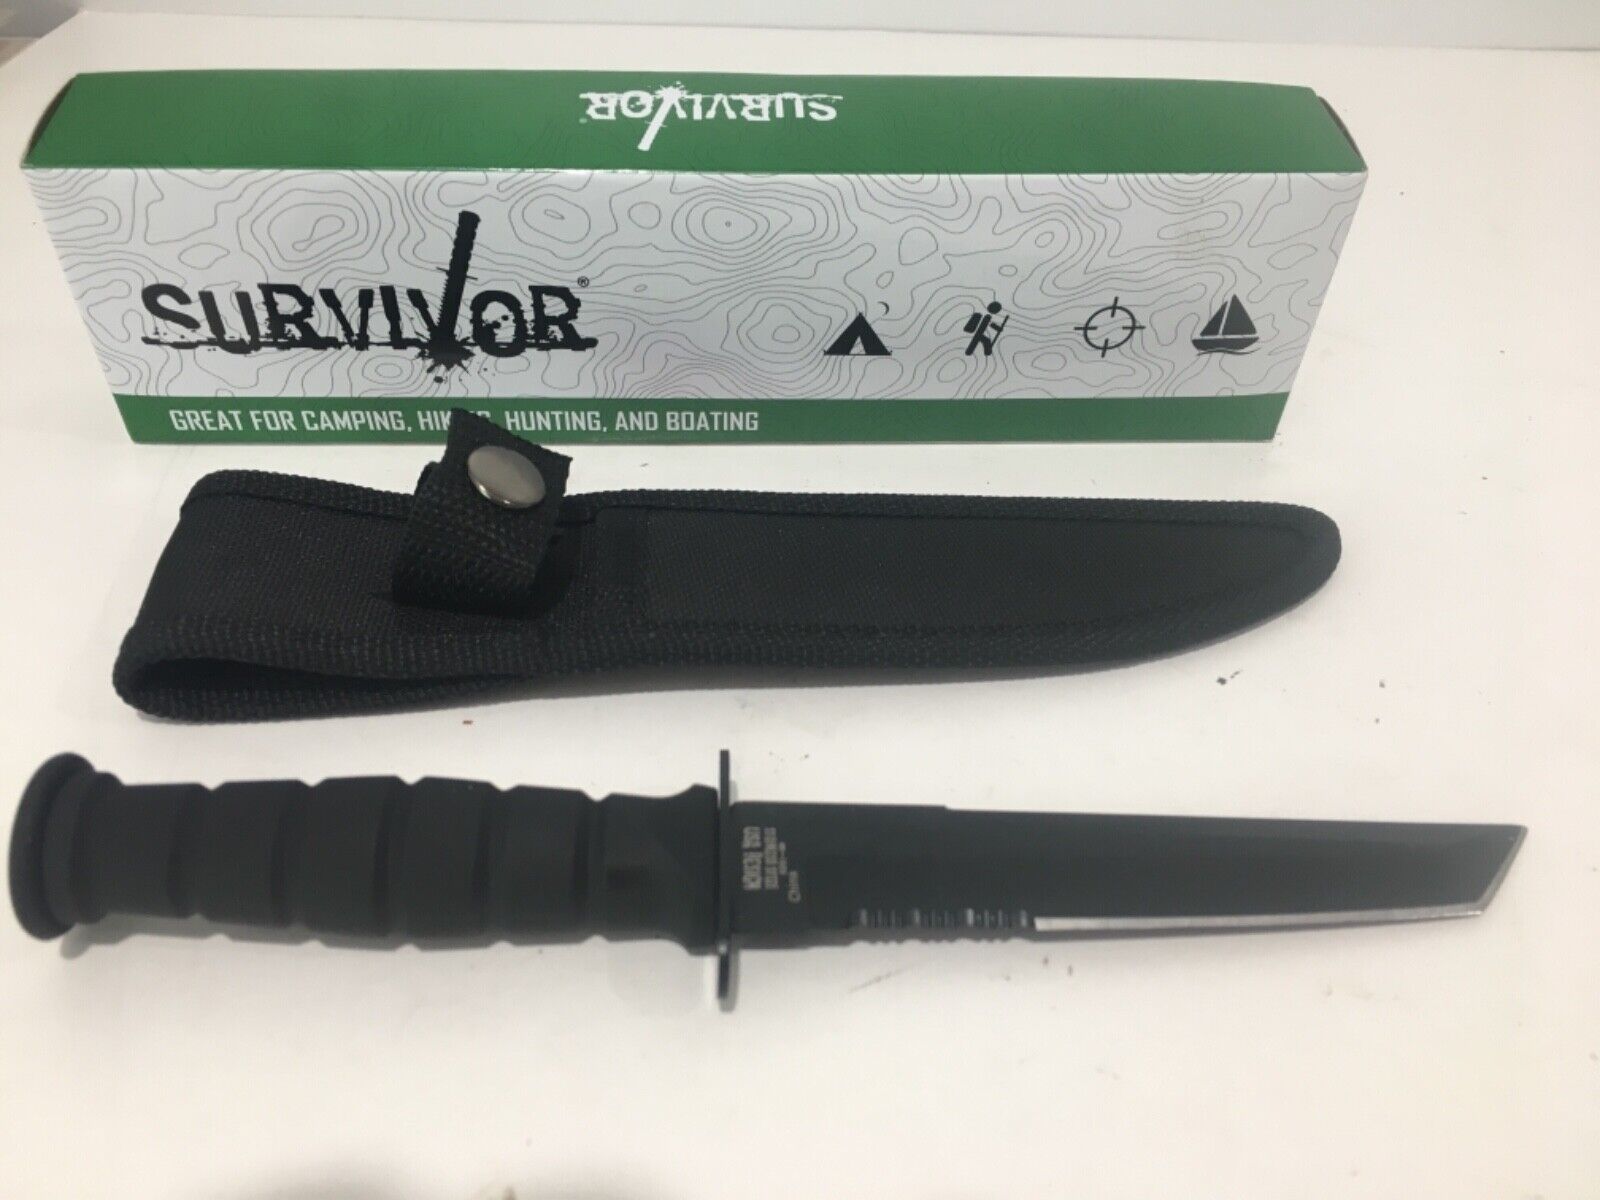 survivor camping knife 7.5 inch long.  Great for camping hiking hunting boating